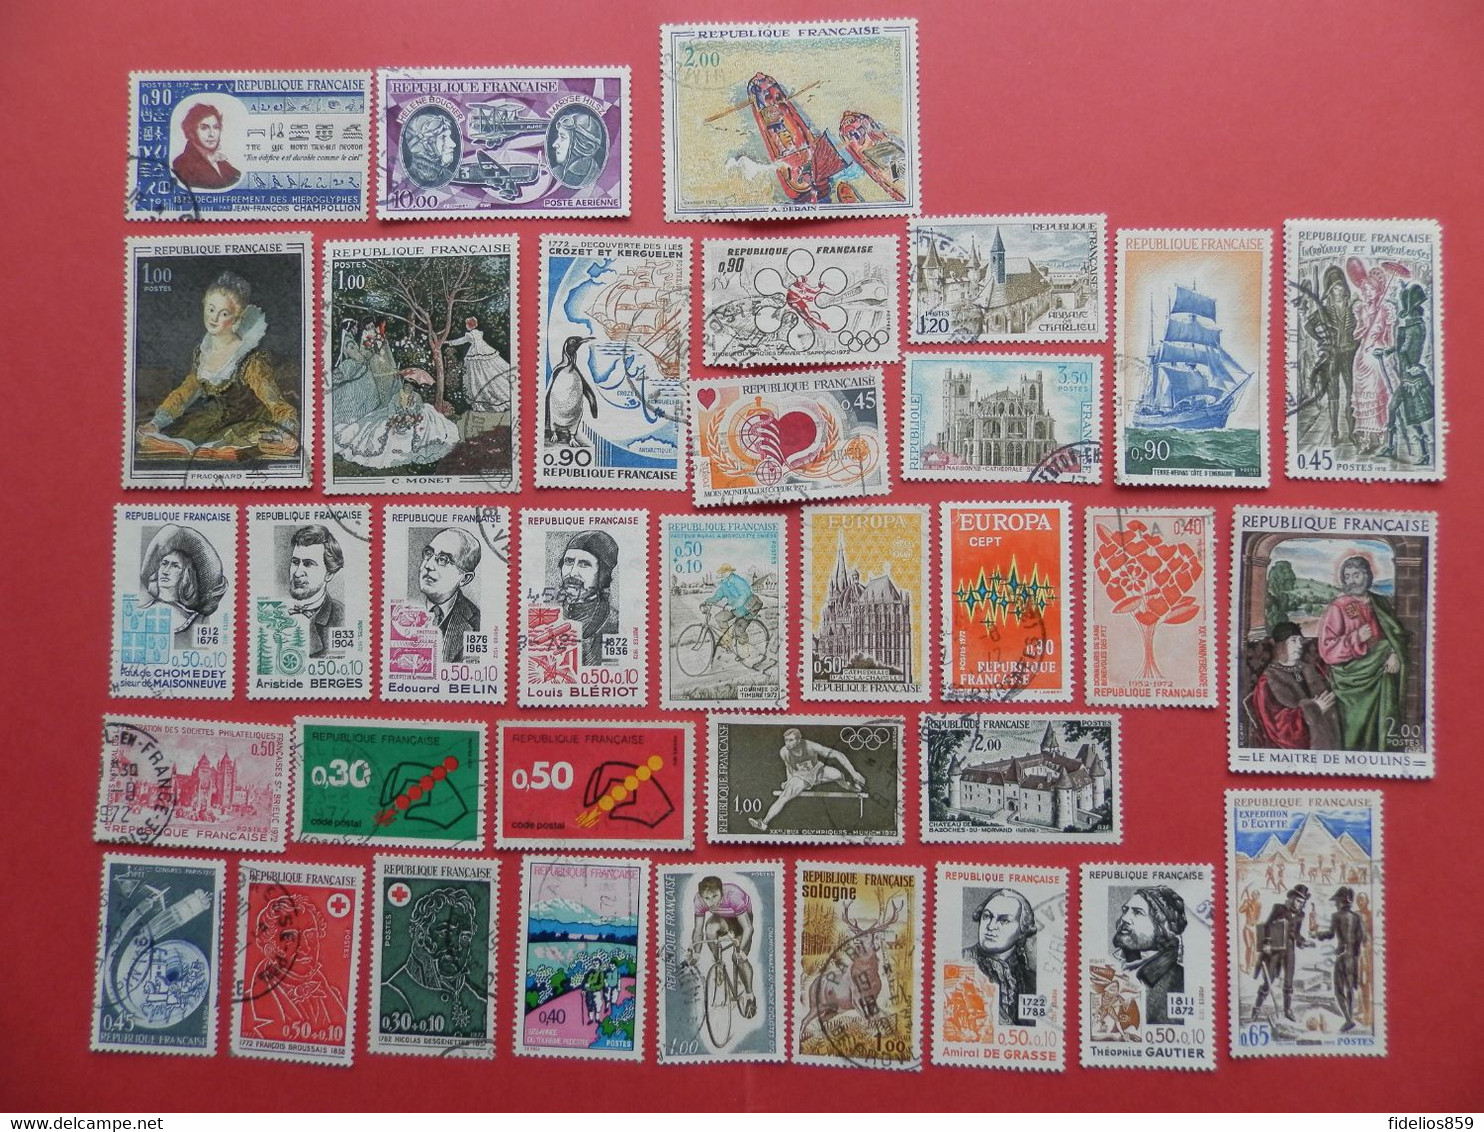 FRANCE OBLITERES : ANNEE COMPLETE 1972 SOIT 35 TIMBRES POSTE DIFFERENTS + PA  47 1ER CHOIX - 1970-1979